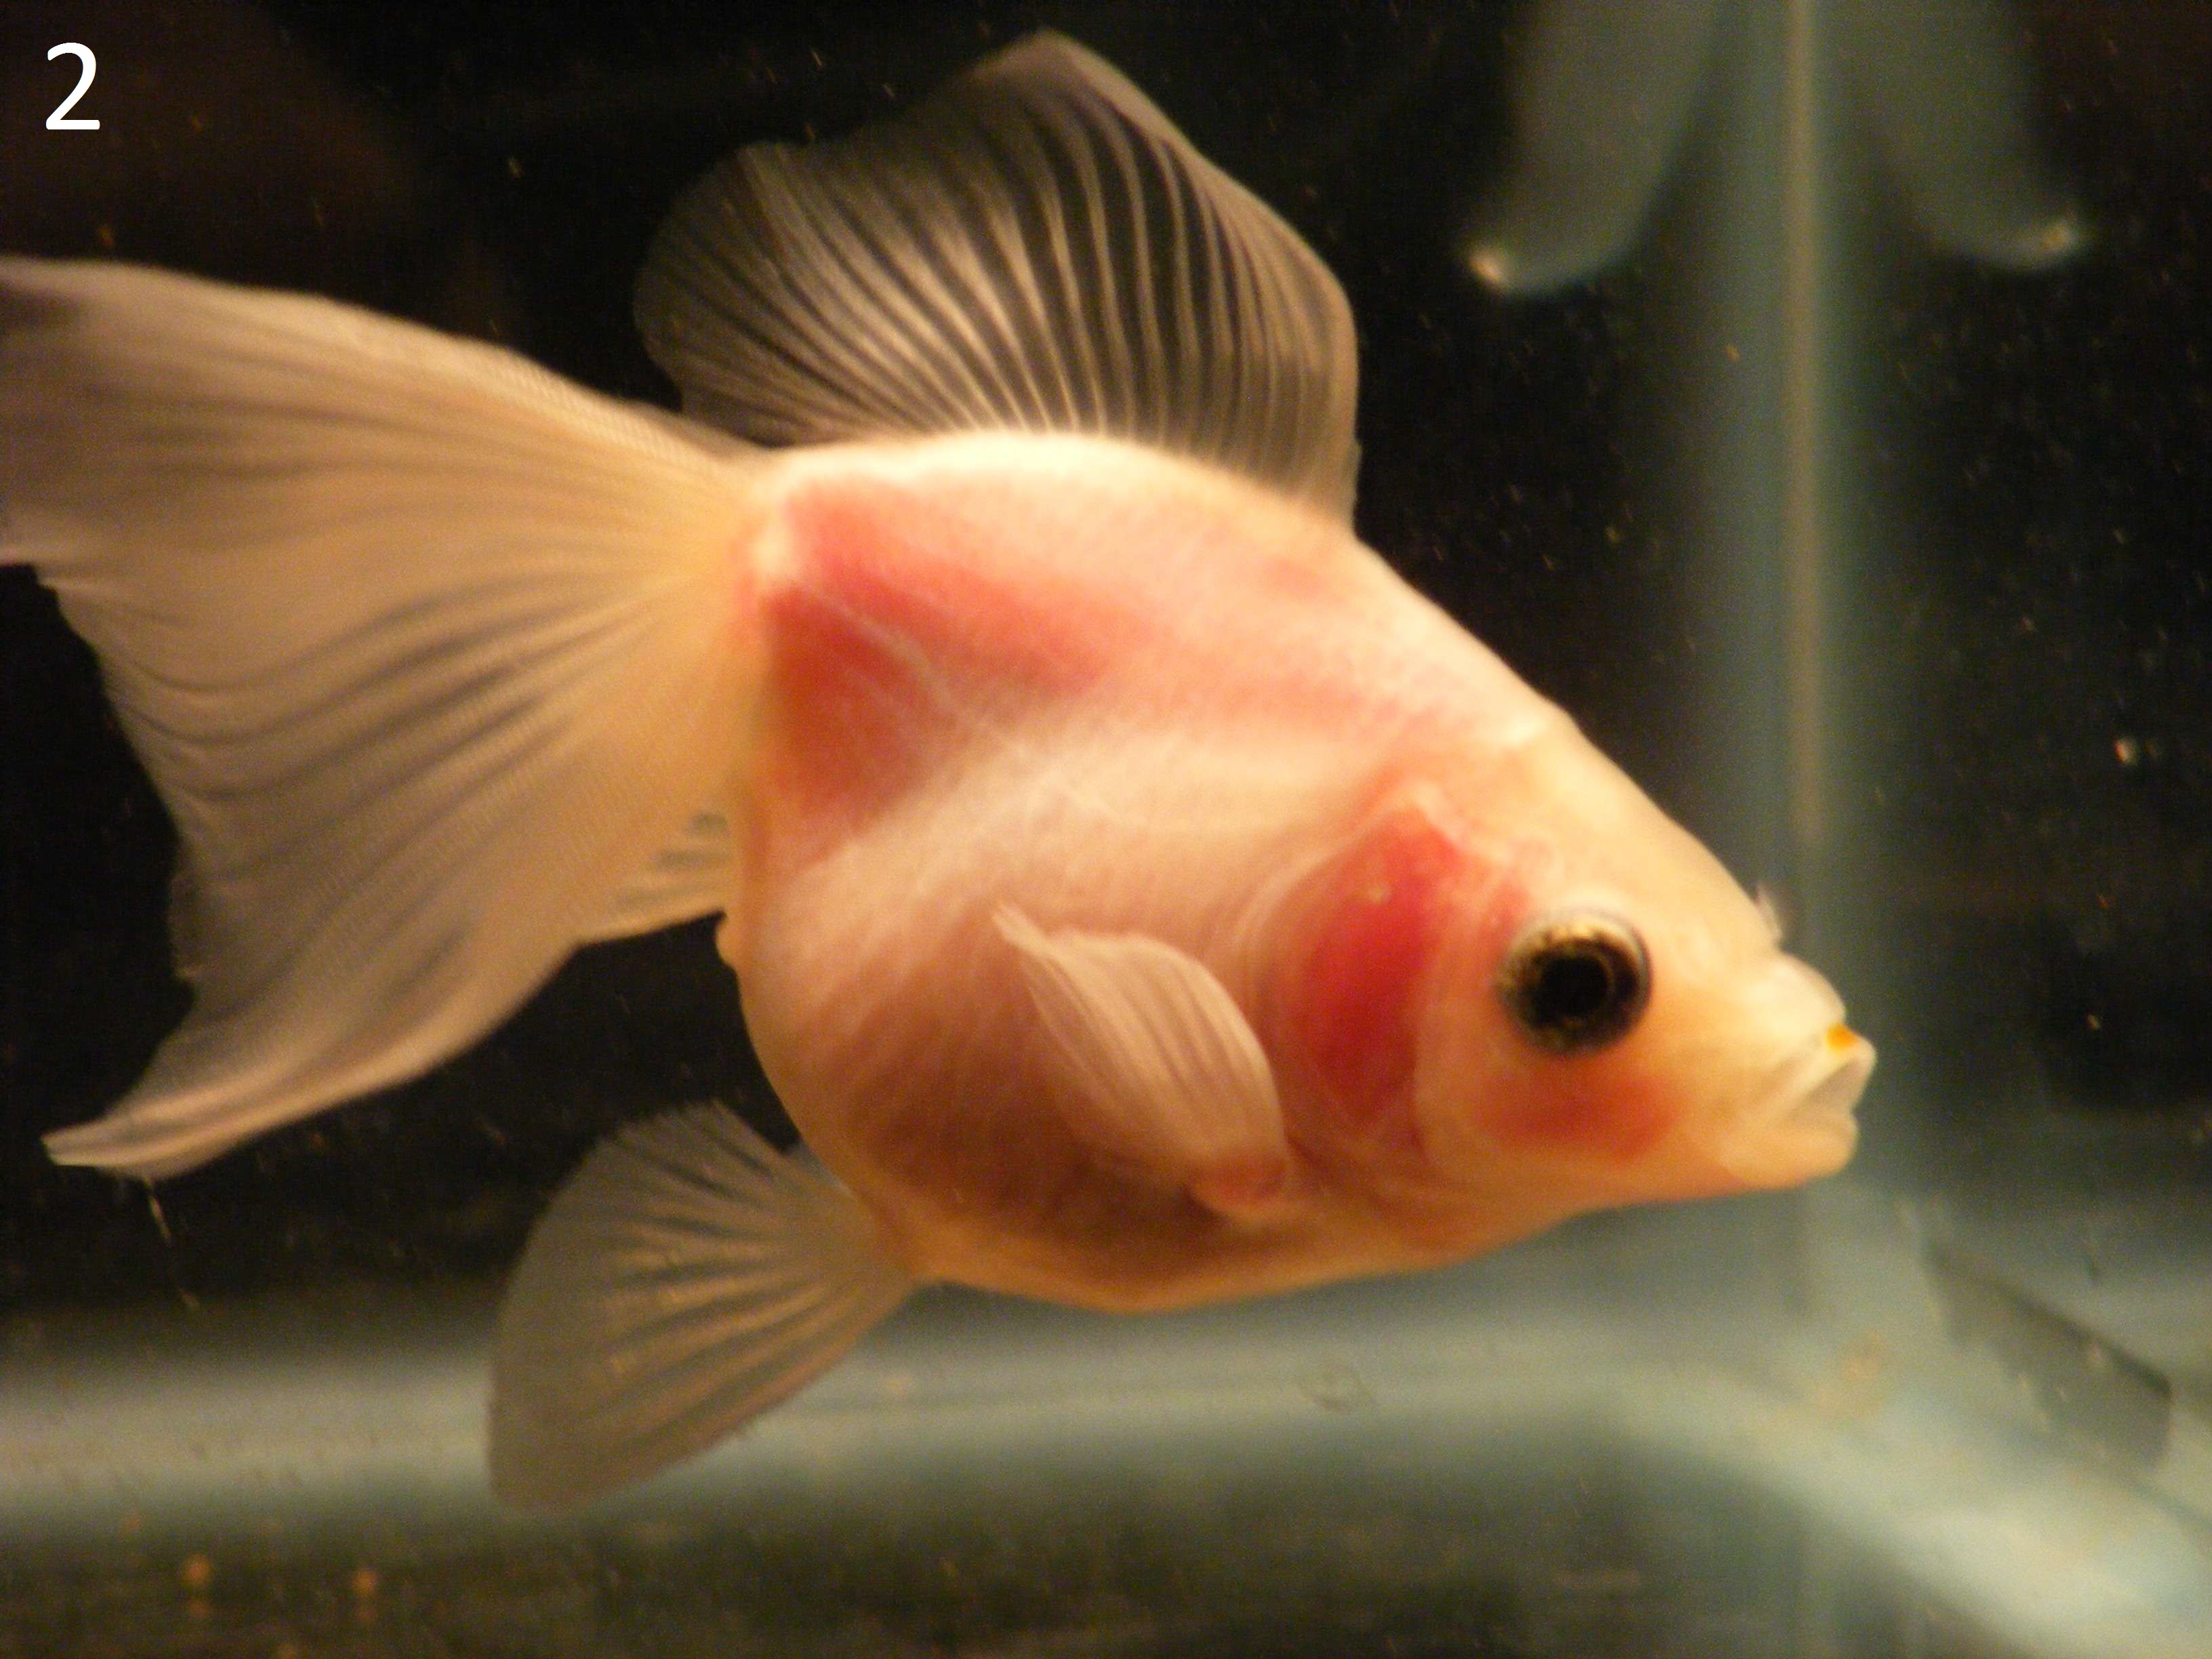 goldfish types and colors